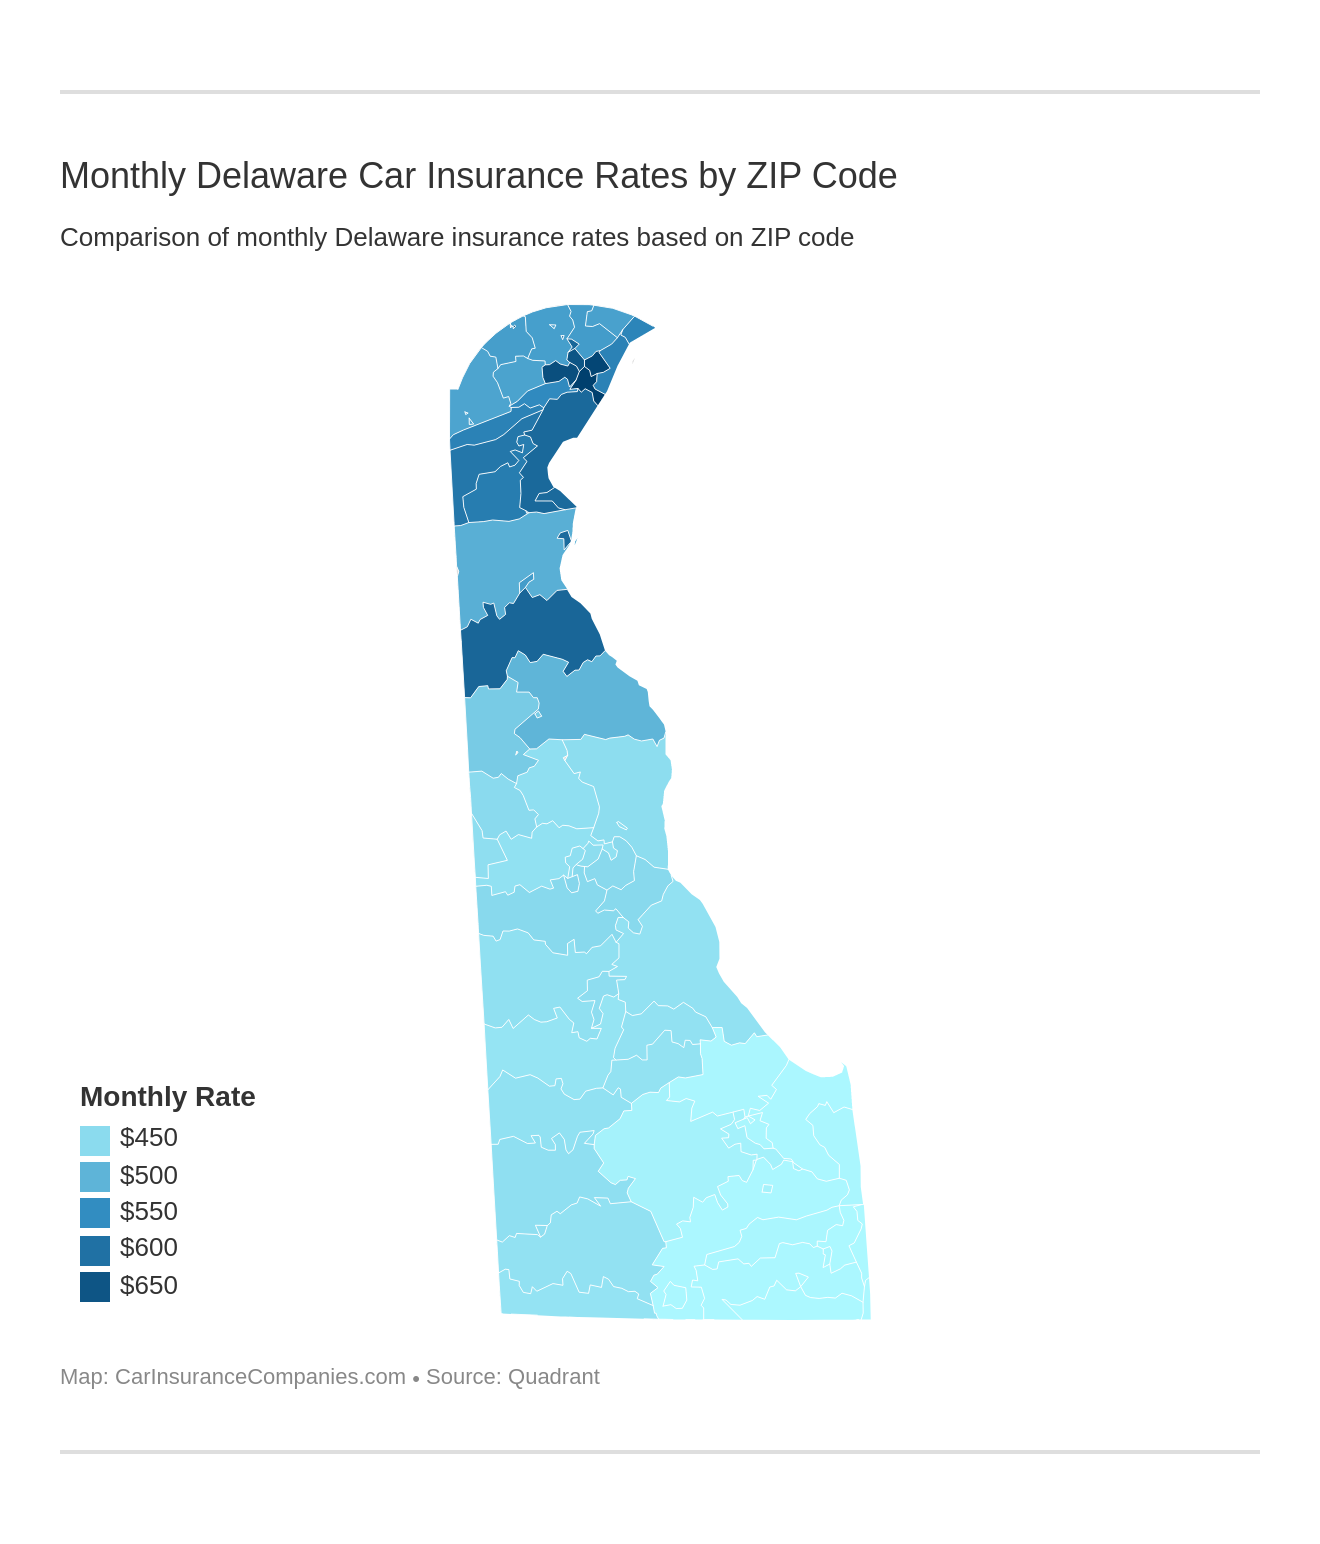 Monthly Delaware Car Insurance Rates by ZIP Code